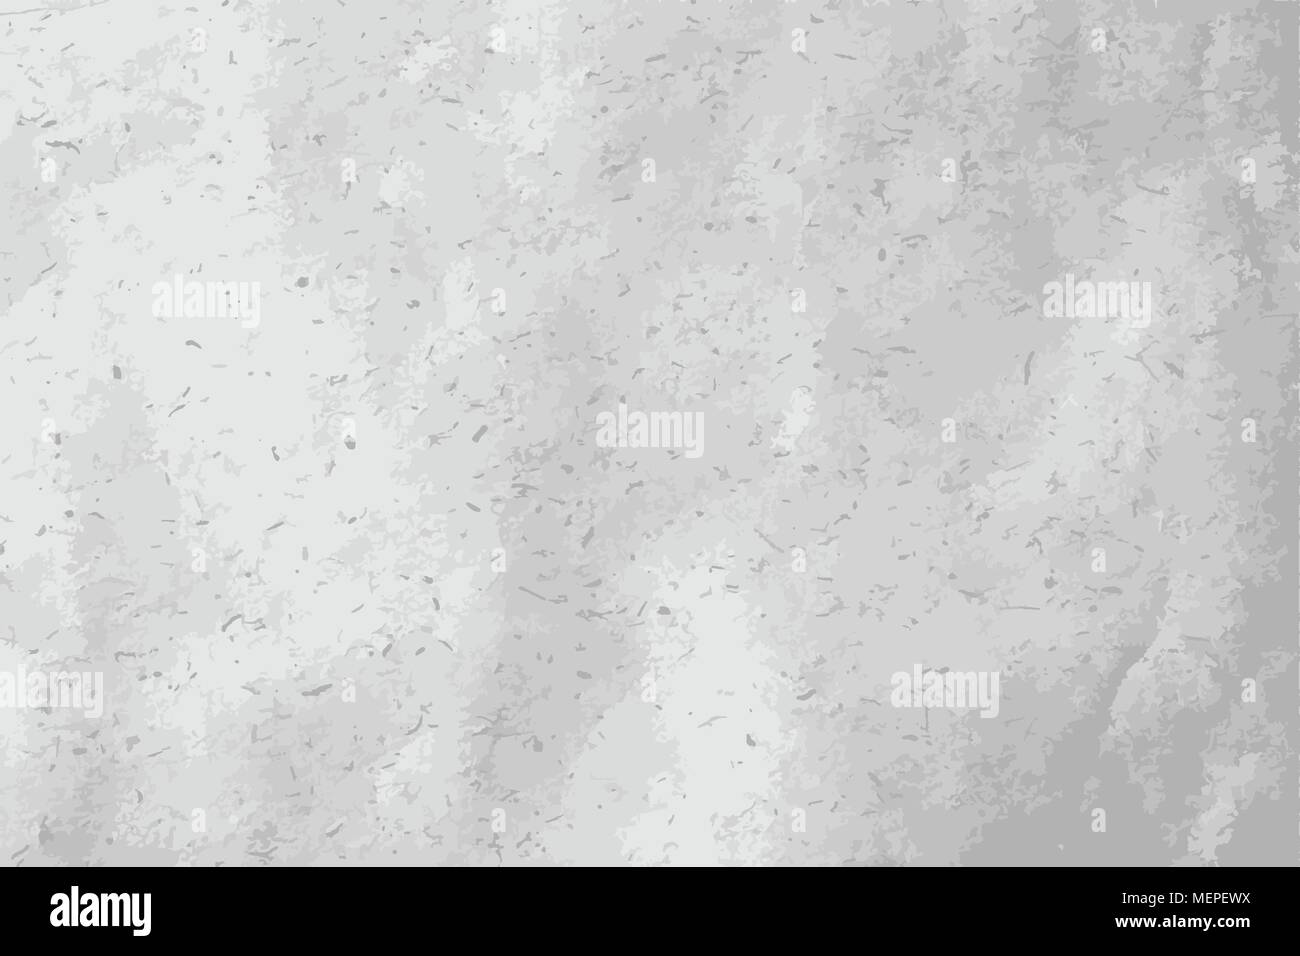 Wrapping paper vector texture for overlay artwork. Grunge effect background Stock Vector